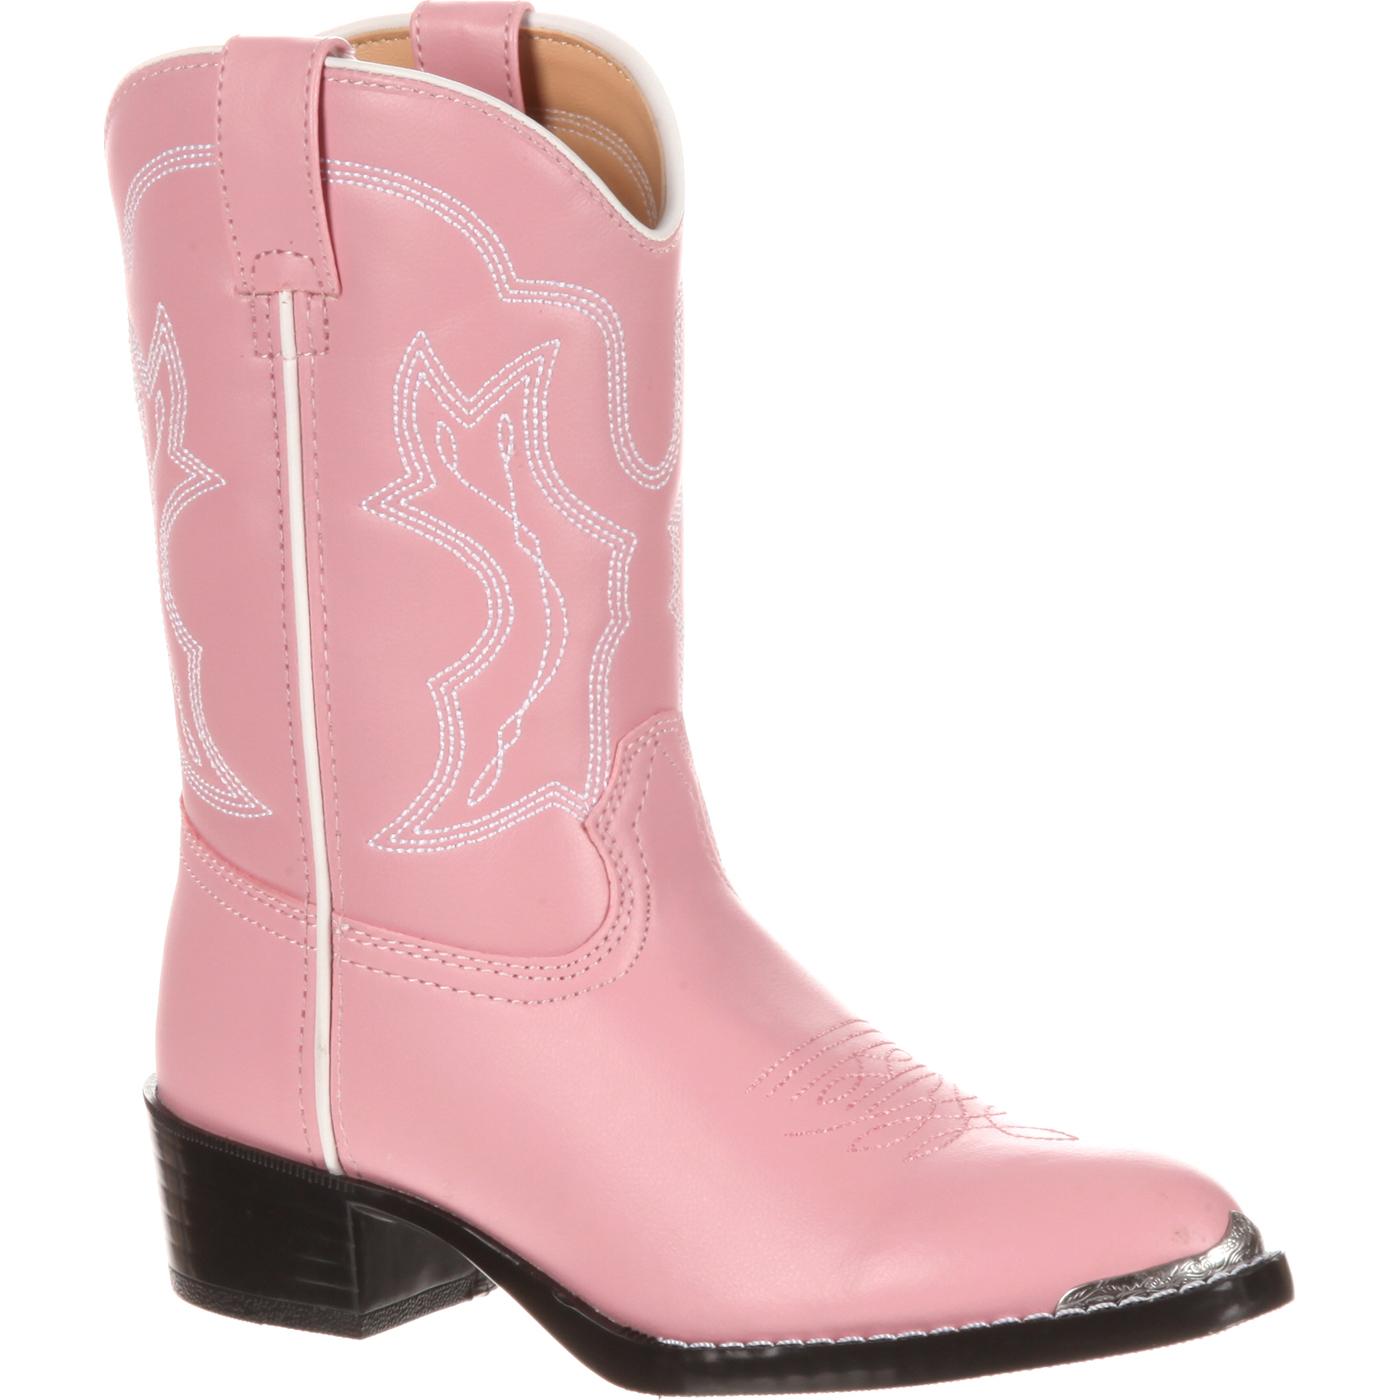 Lv Kids Boots - Pink